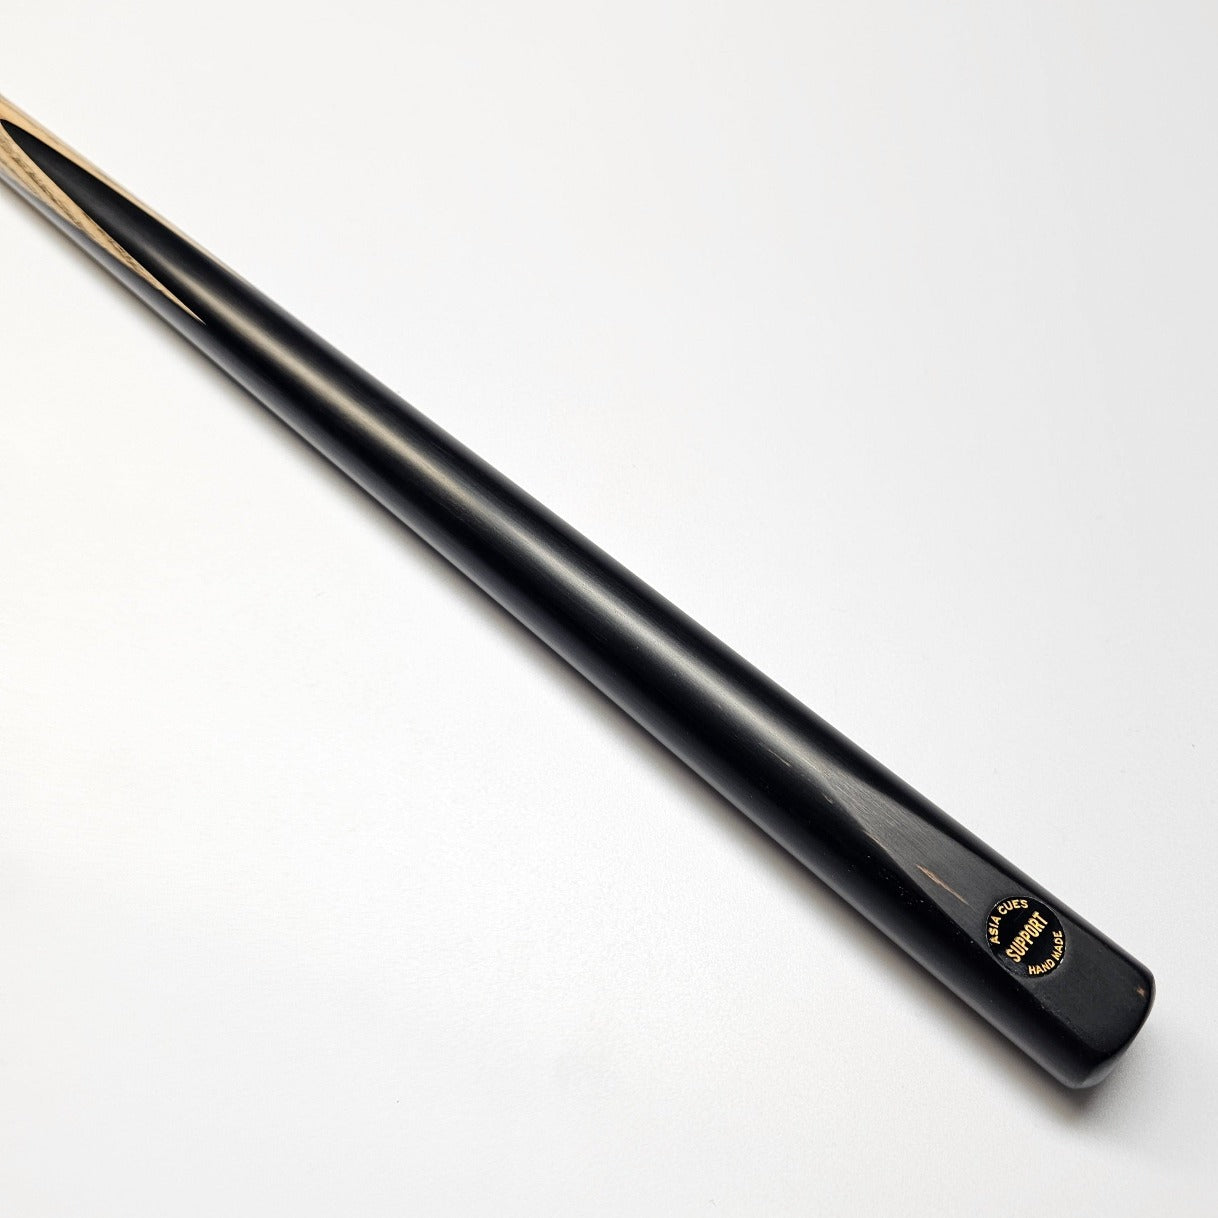 Asia Cues Support - One Piece Snooker Cue 9.4mm Tip, 17.5oz, 57.5"